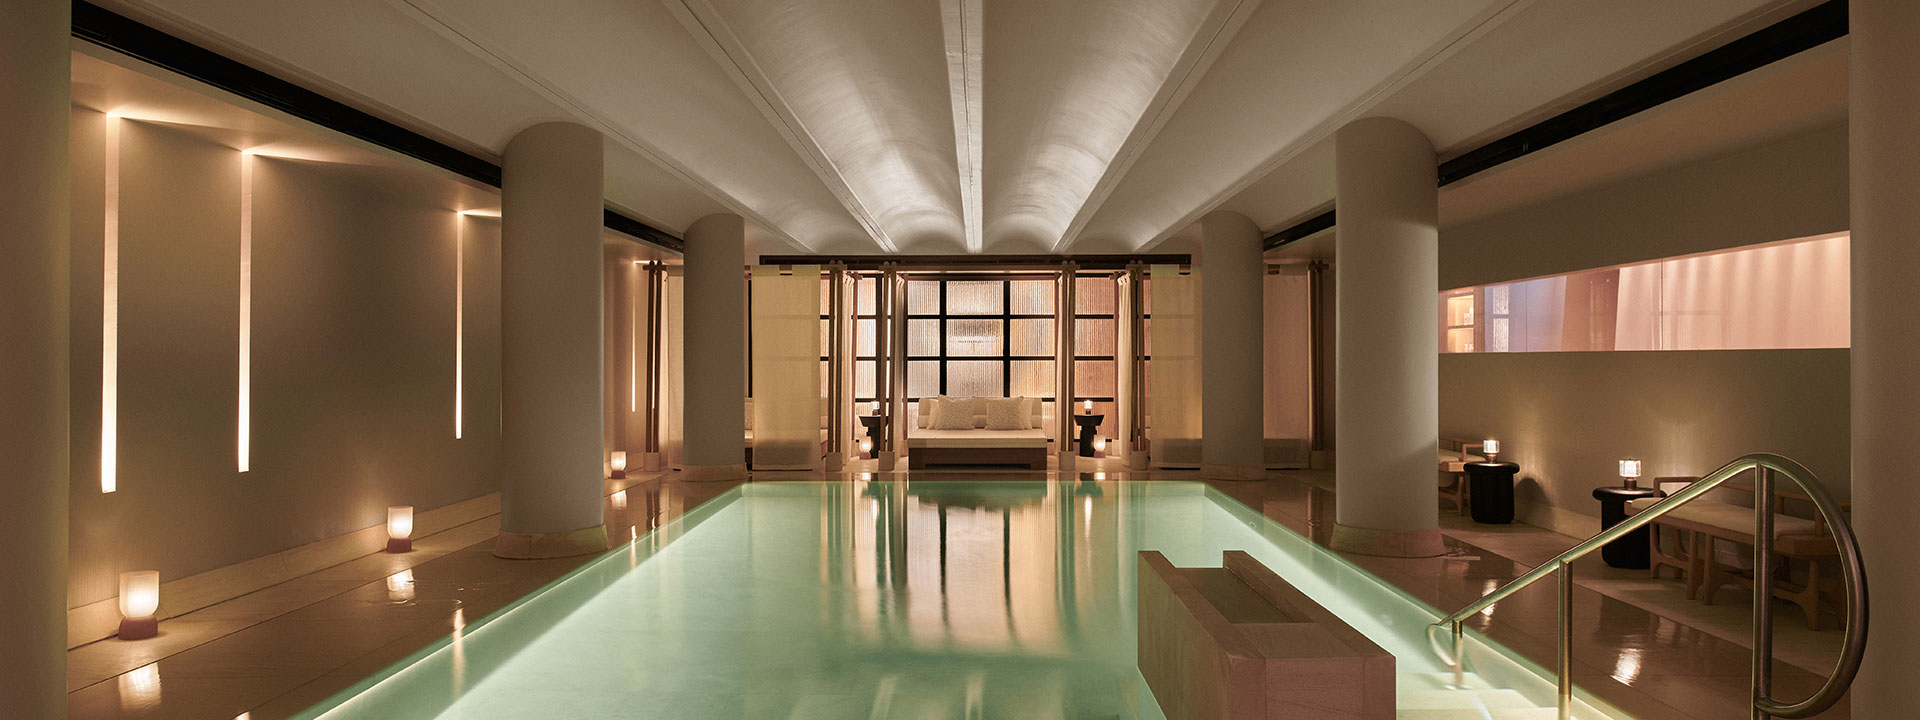 Swimming pool with white cabanas and candles around the side in spa